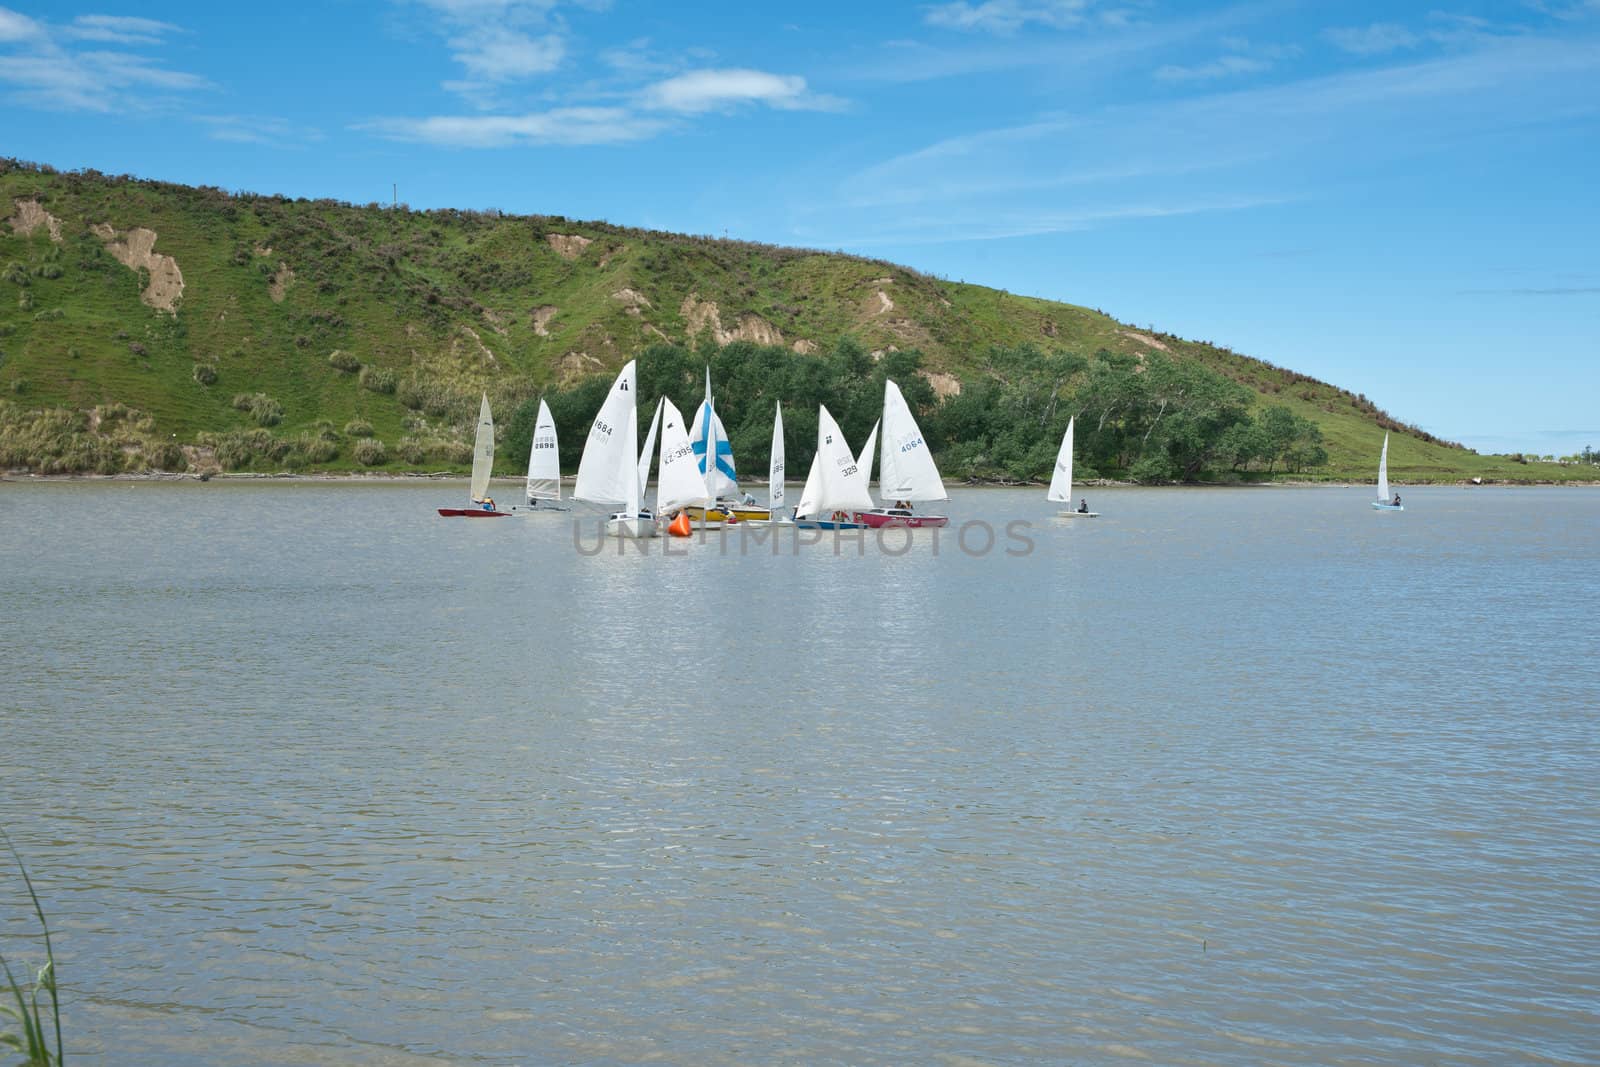 Fleet of small yachts rounding buoy in a race at the Wairoa Yacht Club, New Zealand.







A fleet of small yachts round the buoy in a race at the Wairoa Yacht Club, New Zealand.